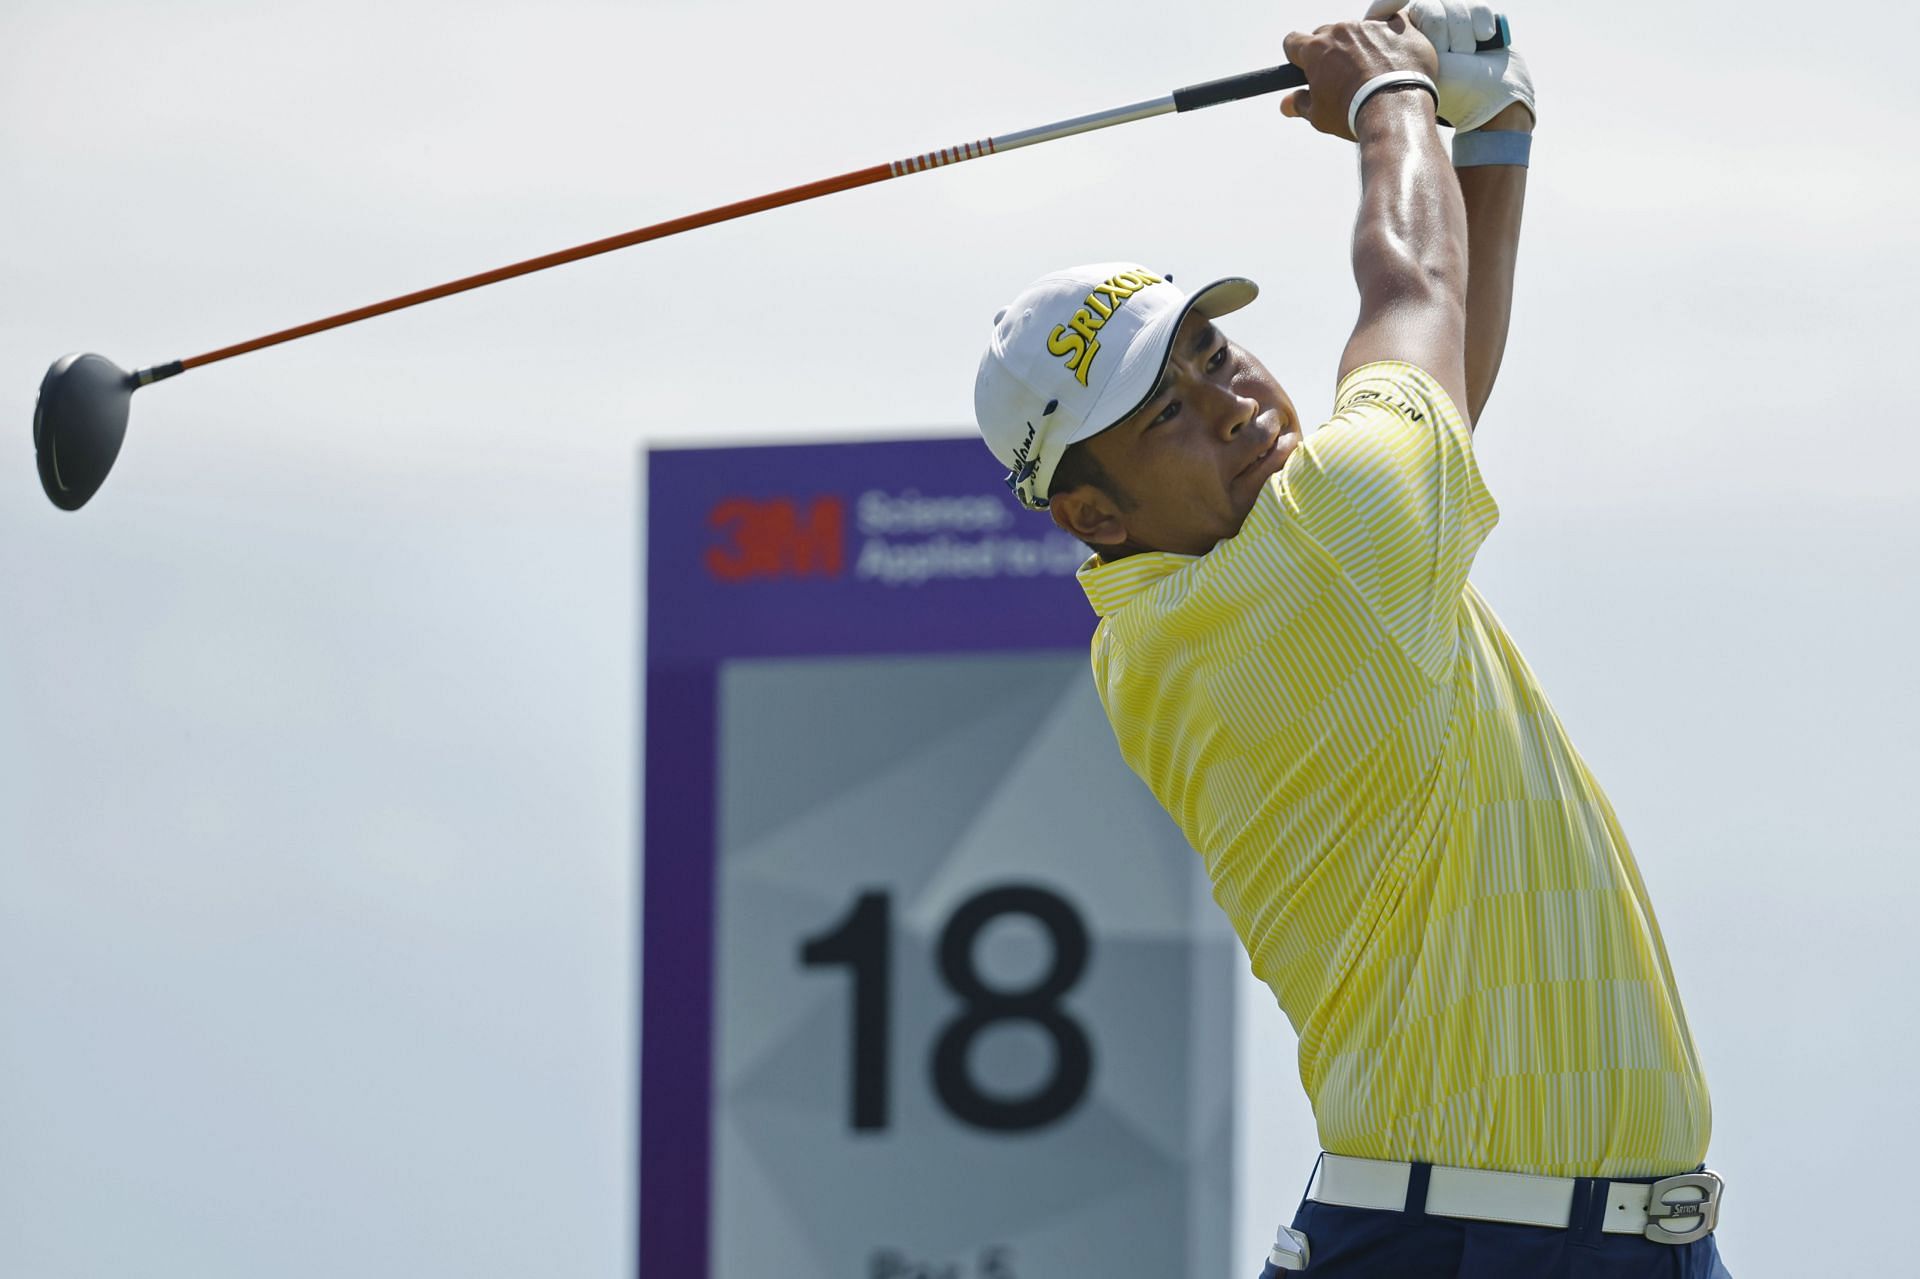 Hideki Matsuyama tees off on the 18th hole during the fourth round at the 3M Open